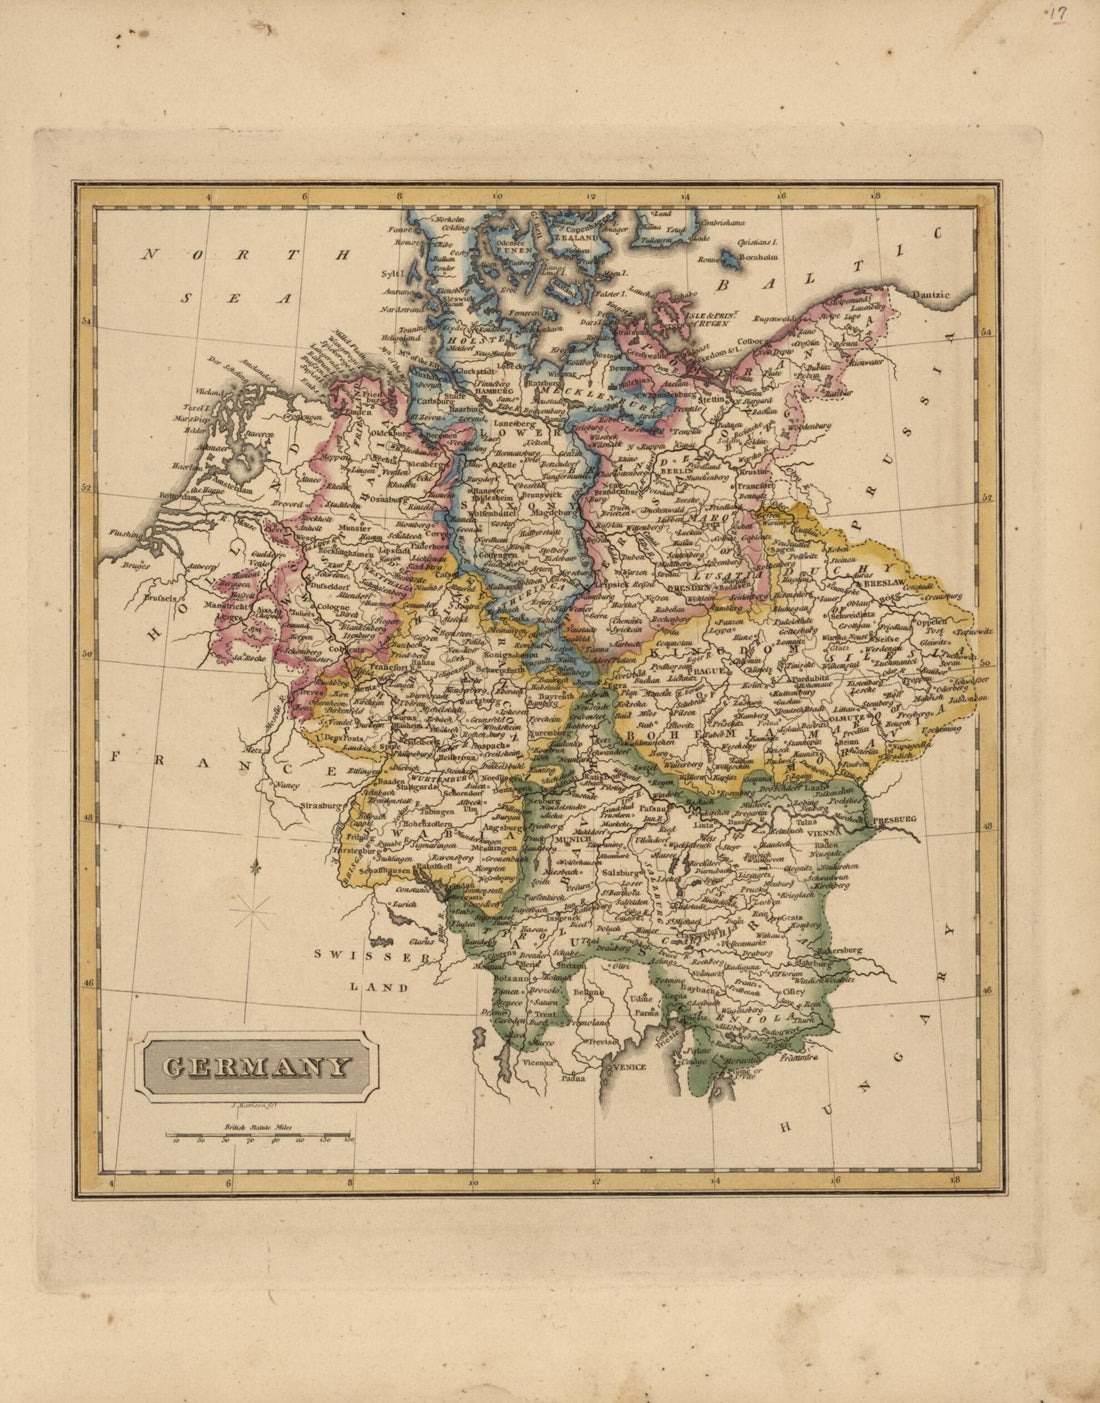 This old map of Germany from a New and Elegant General Atlas, Containing Maps of Each of the United States  from 1817 was created by Henry Schenck Tanner in 1817